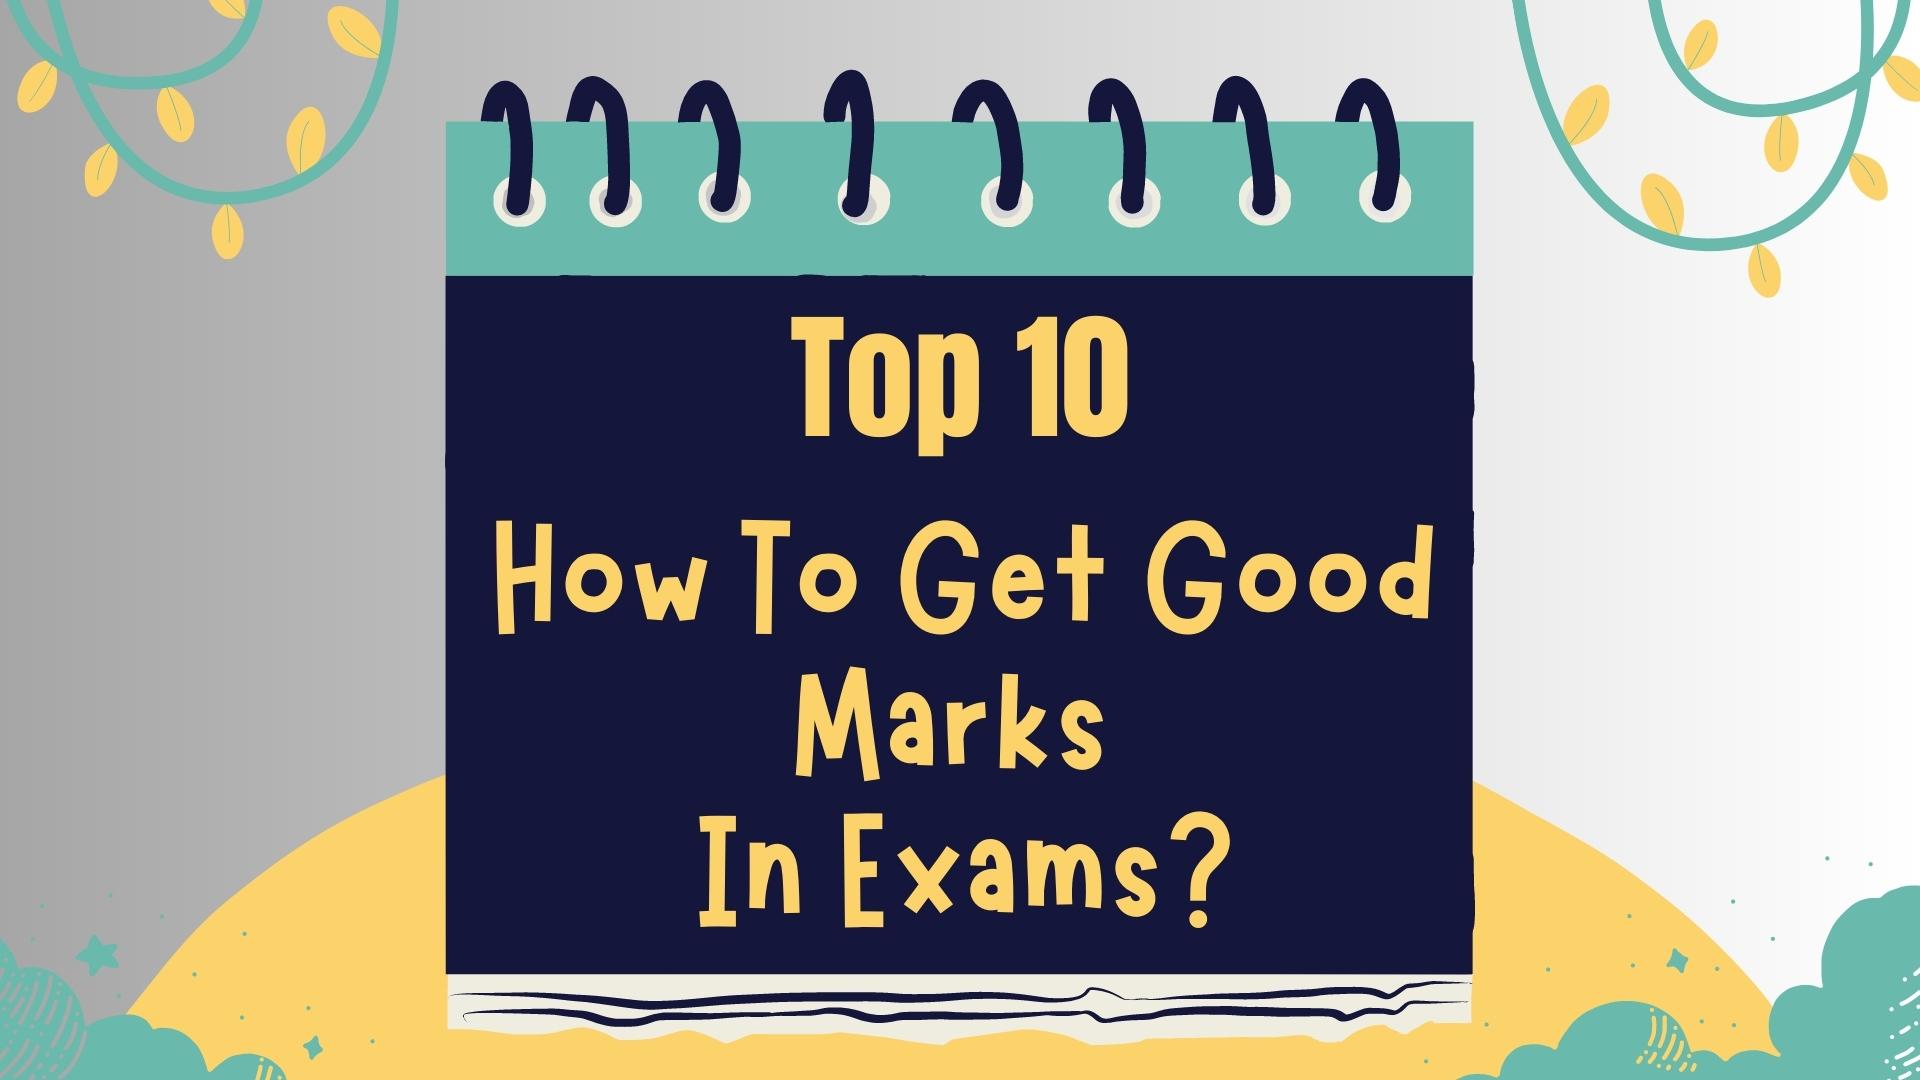 How To Get Good Marks In Exams?